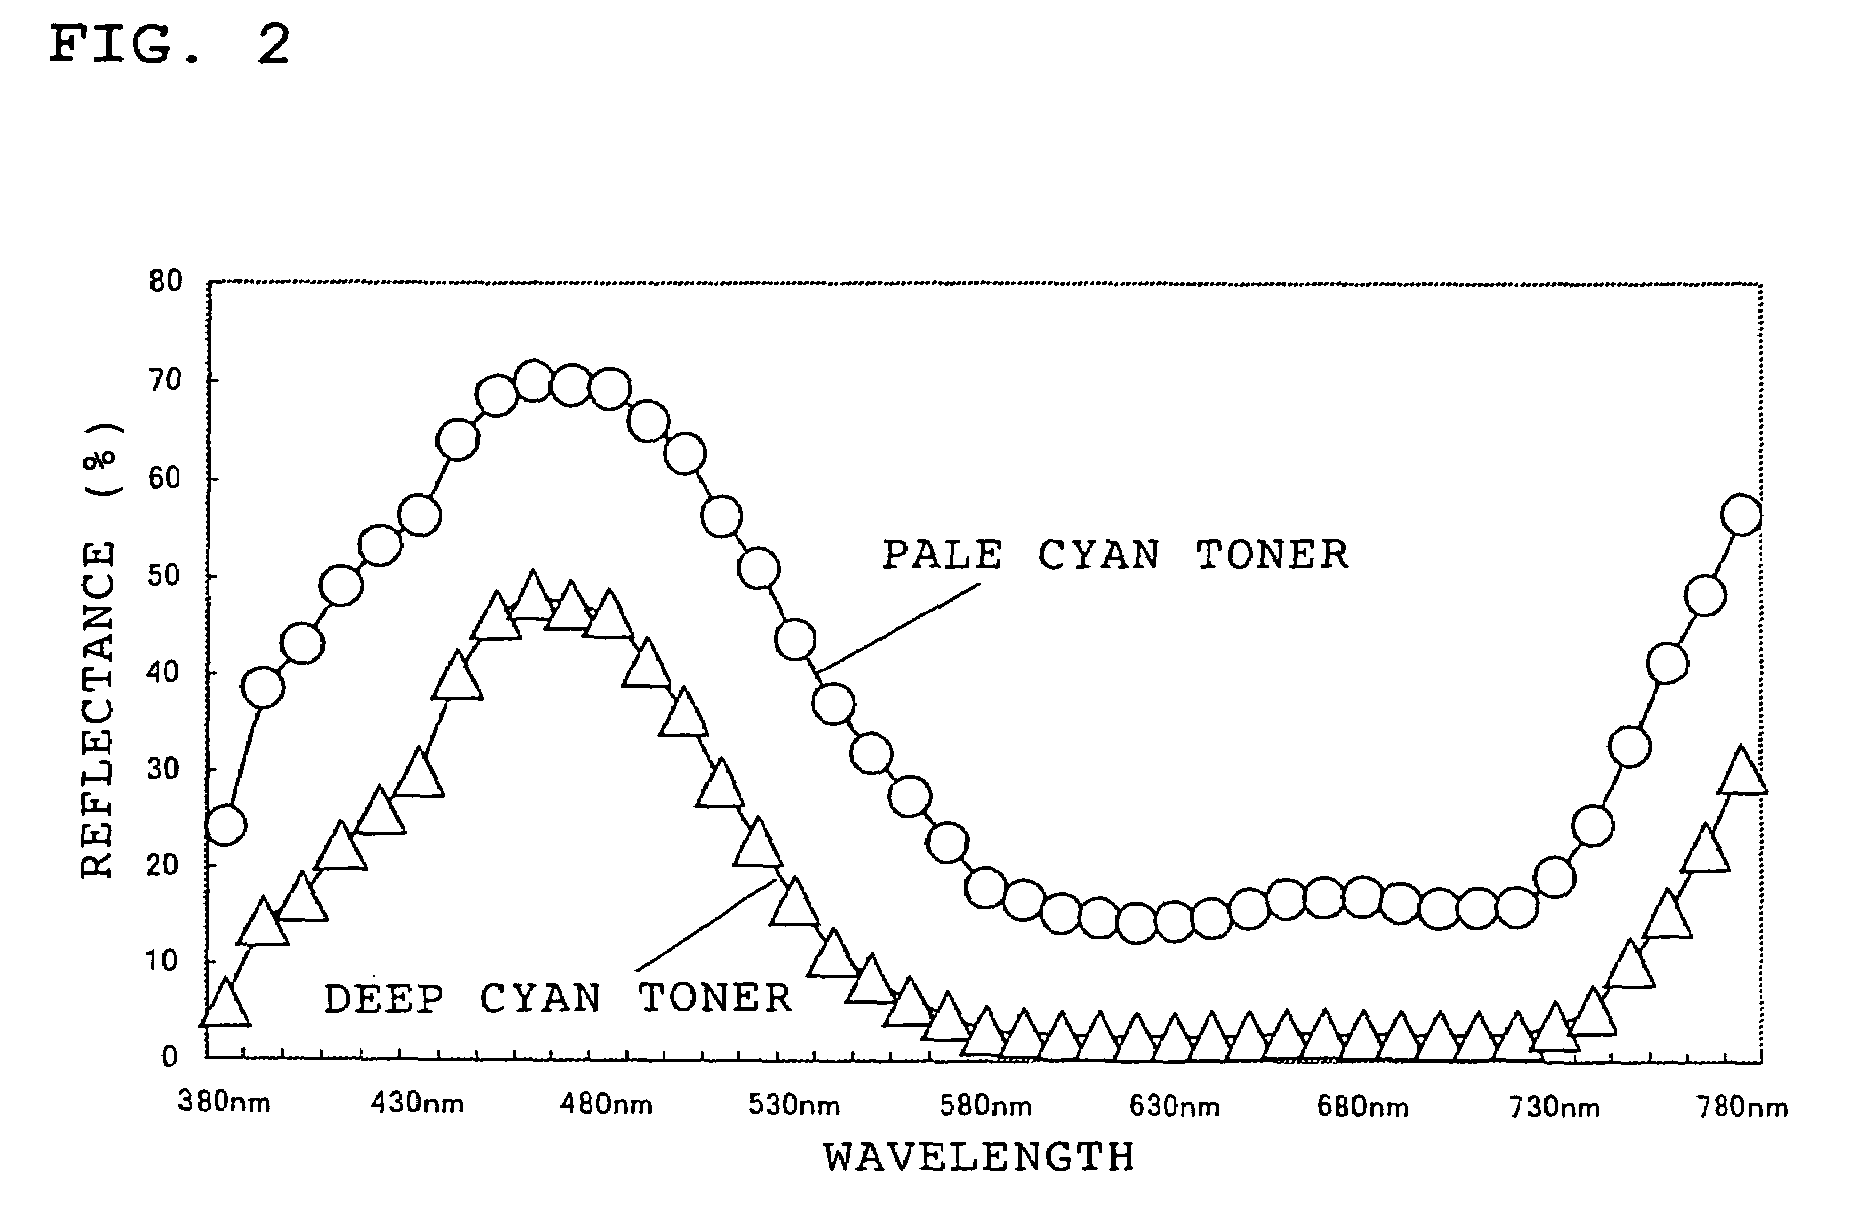 Cyan toner and method for forming an image